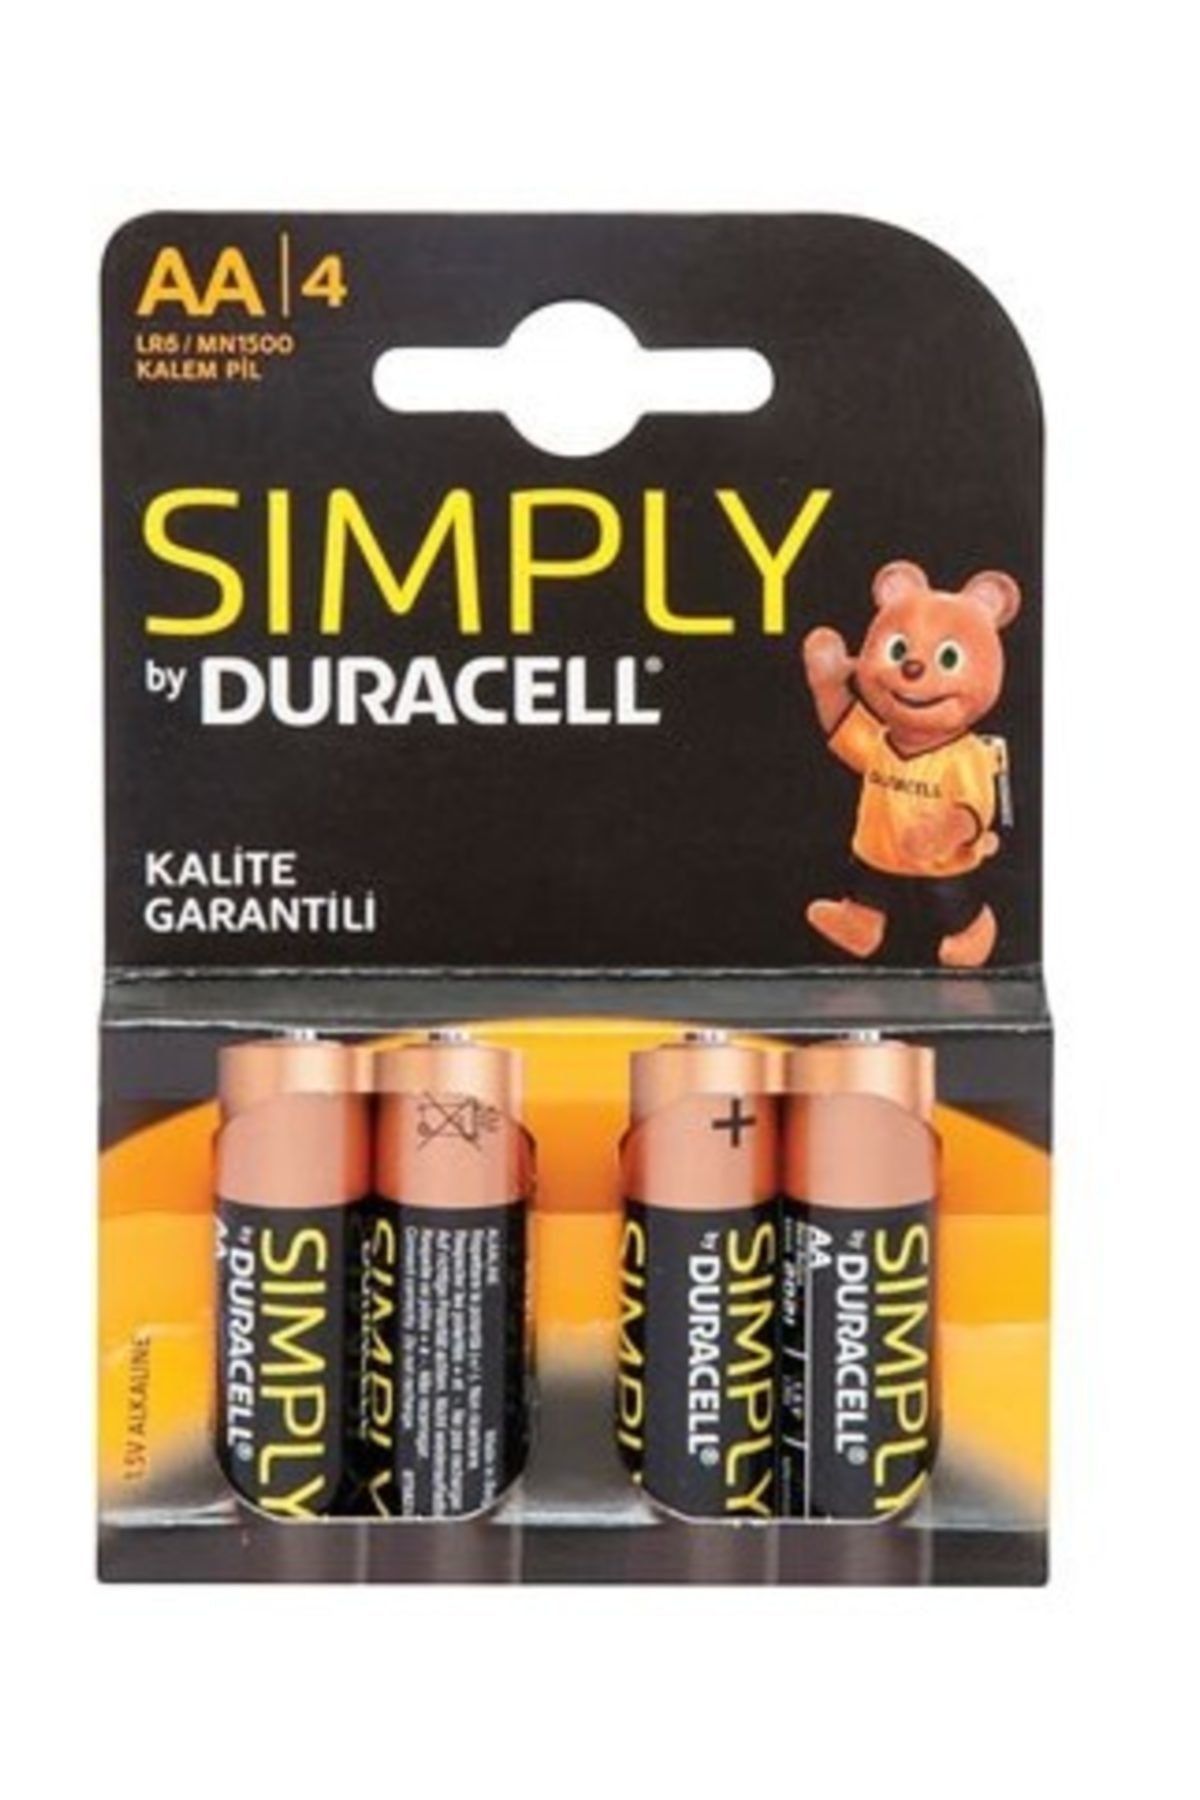 Duracell simply AA. Duracell simply